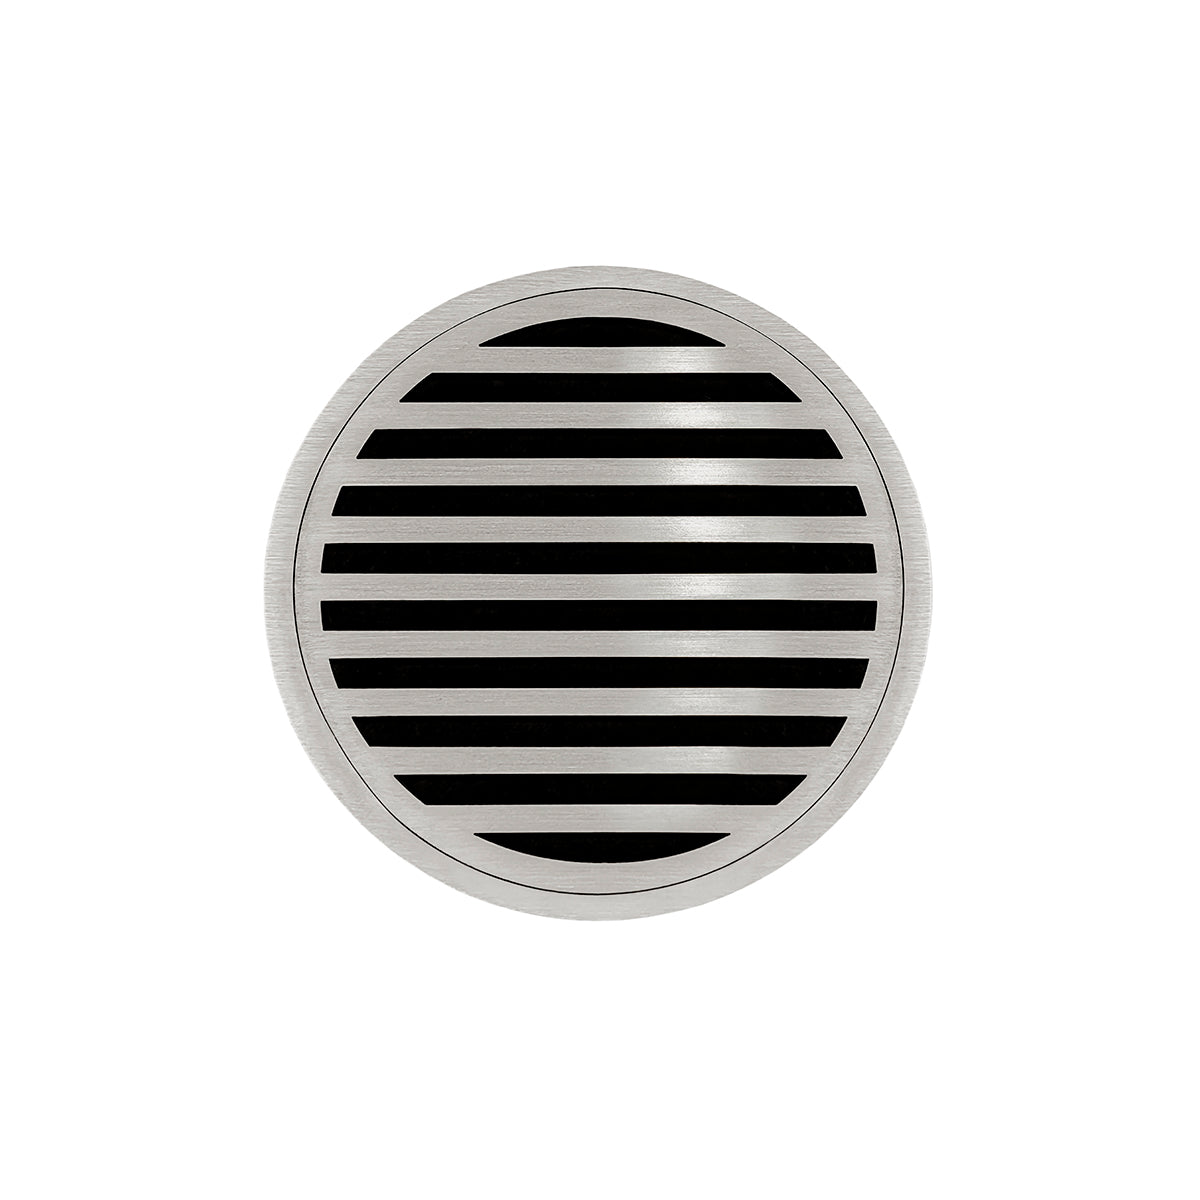 Infinity Drain 5" Round RNDB 5 Premium Center Drain Kit with Lines Pattern Decorative Plate with PVC Bonded Flange Drain Body, 2", 3" and 4" Outlet